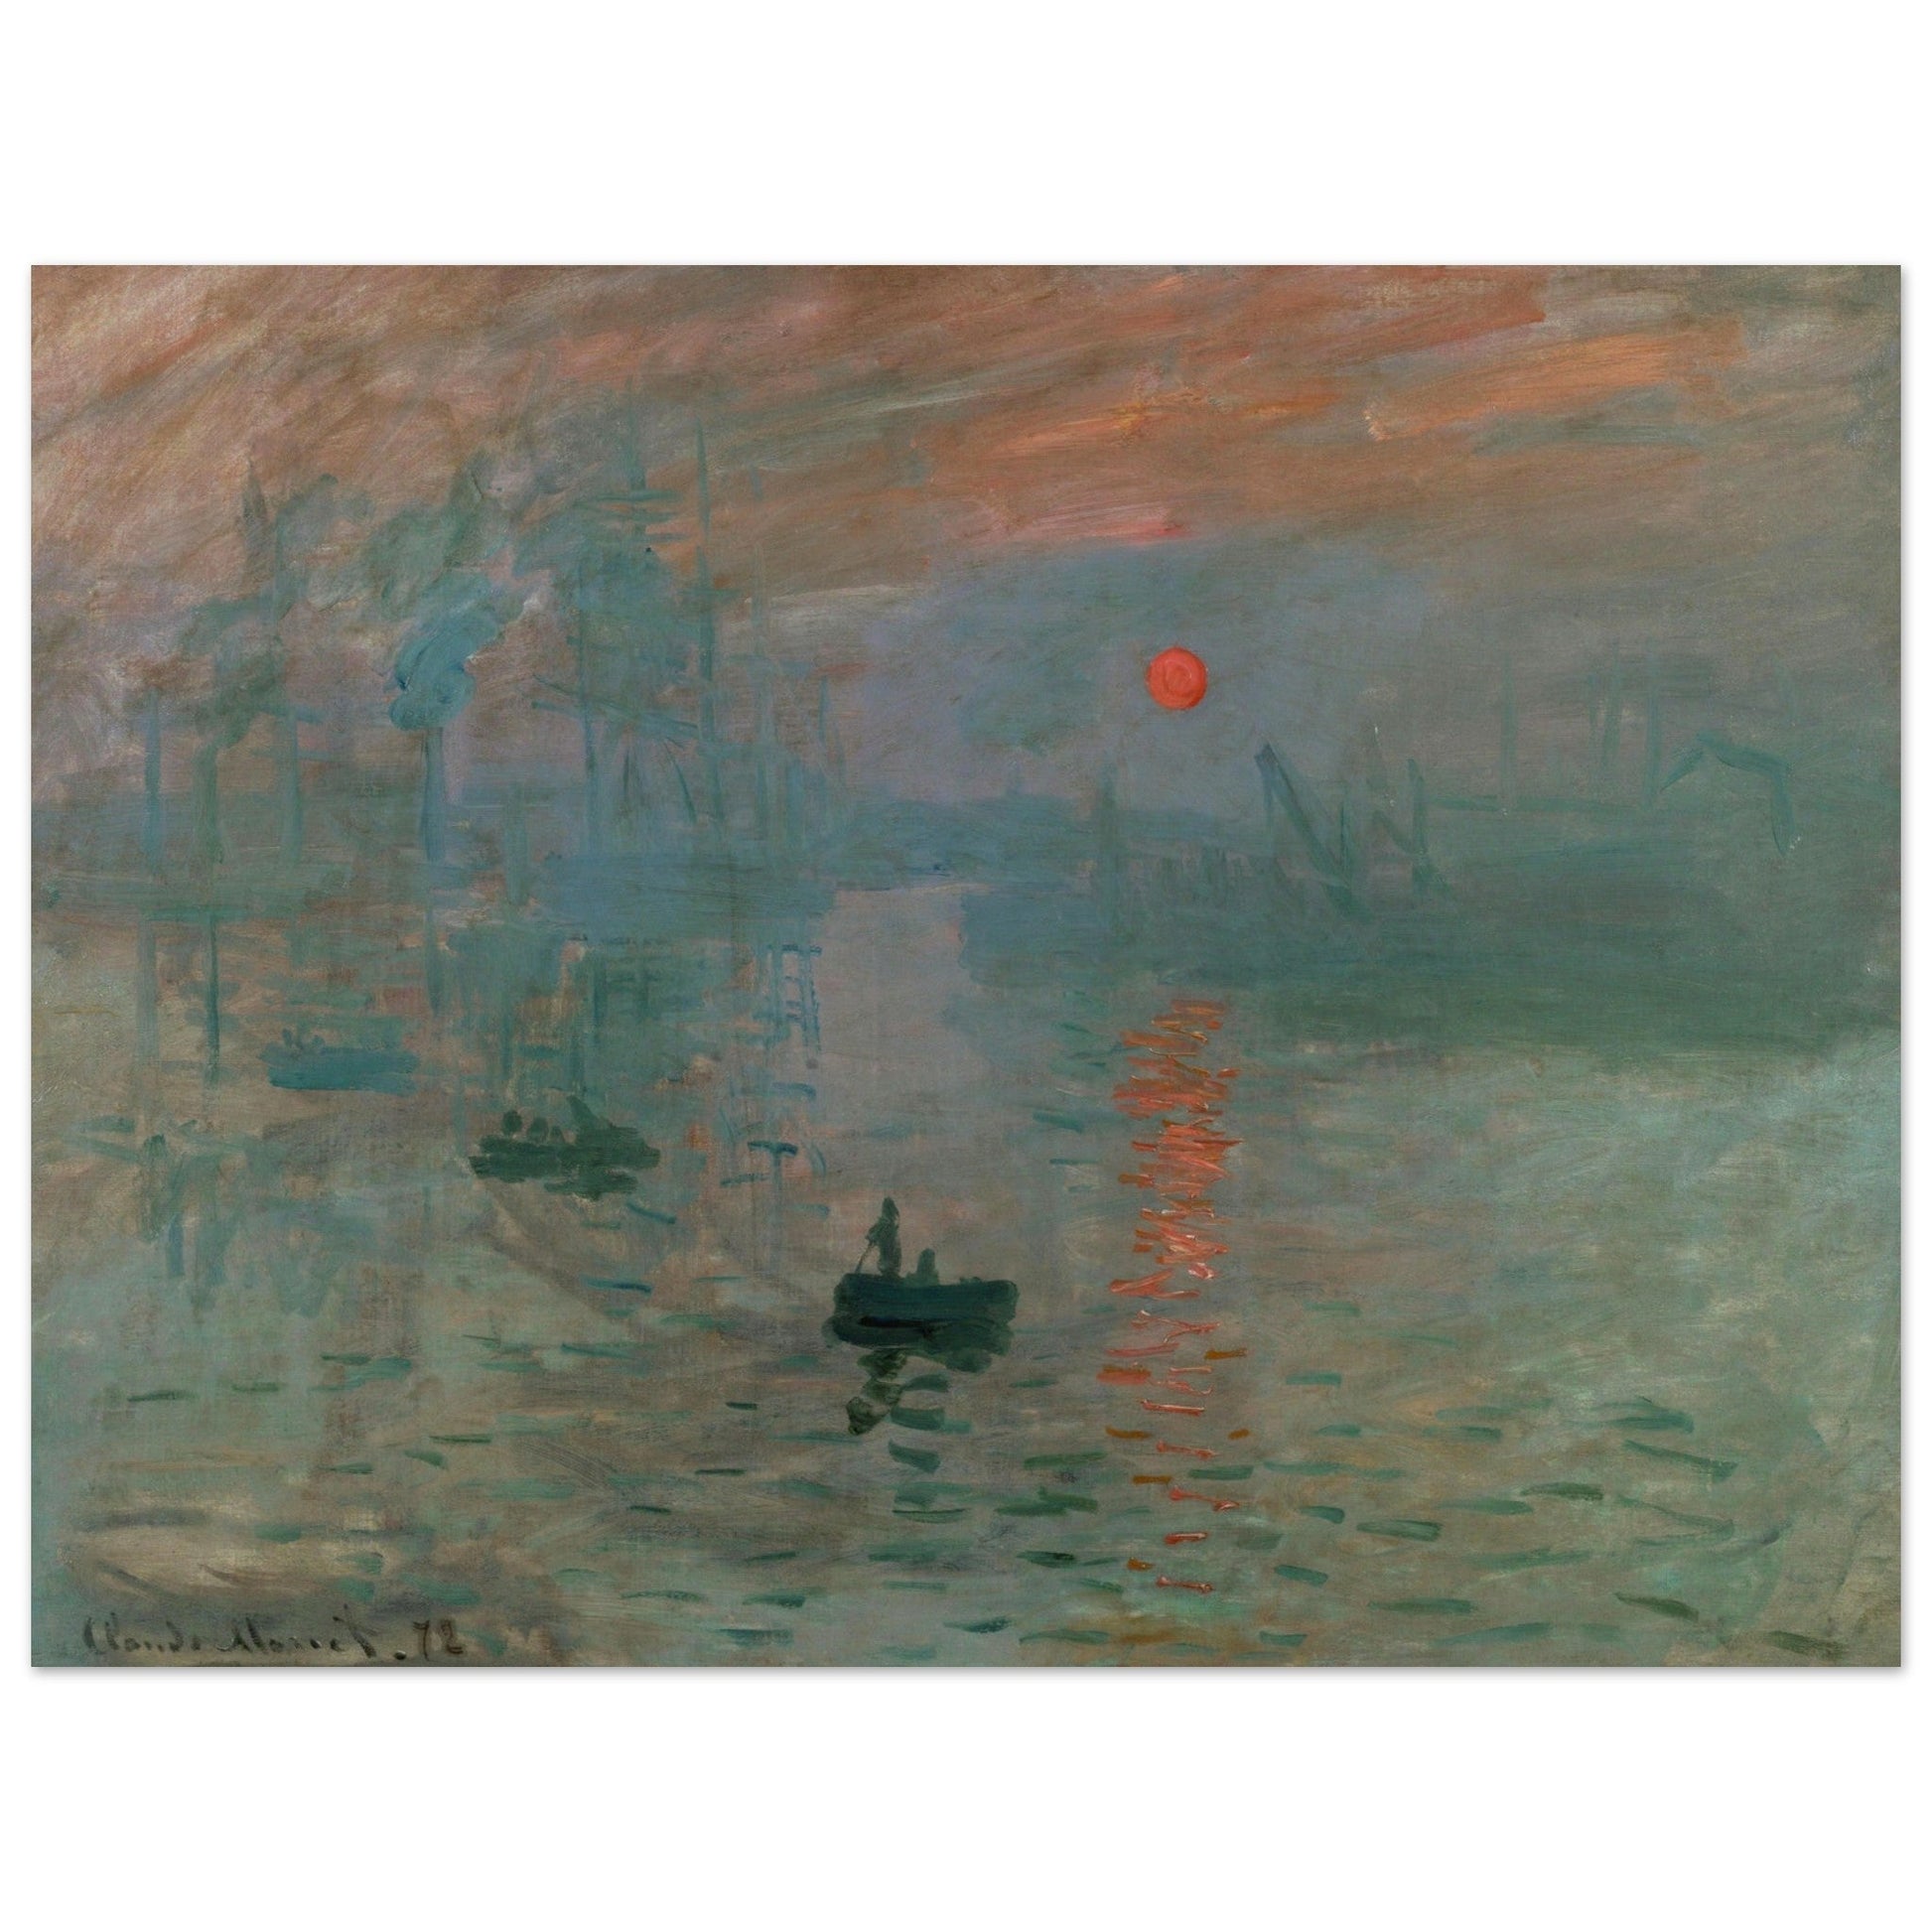 Add a touch of Pop Art color to your room with Traditional Art's "Impression, Sunrise." This stunning wall art poster combines the beauty of Monet's impressionist technique with